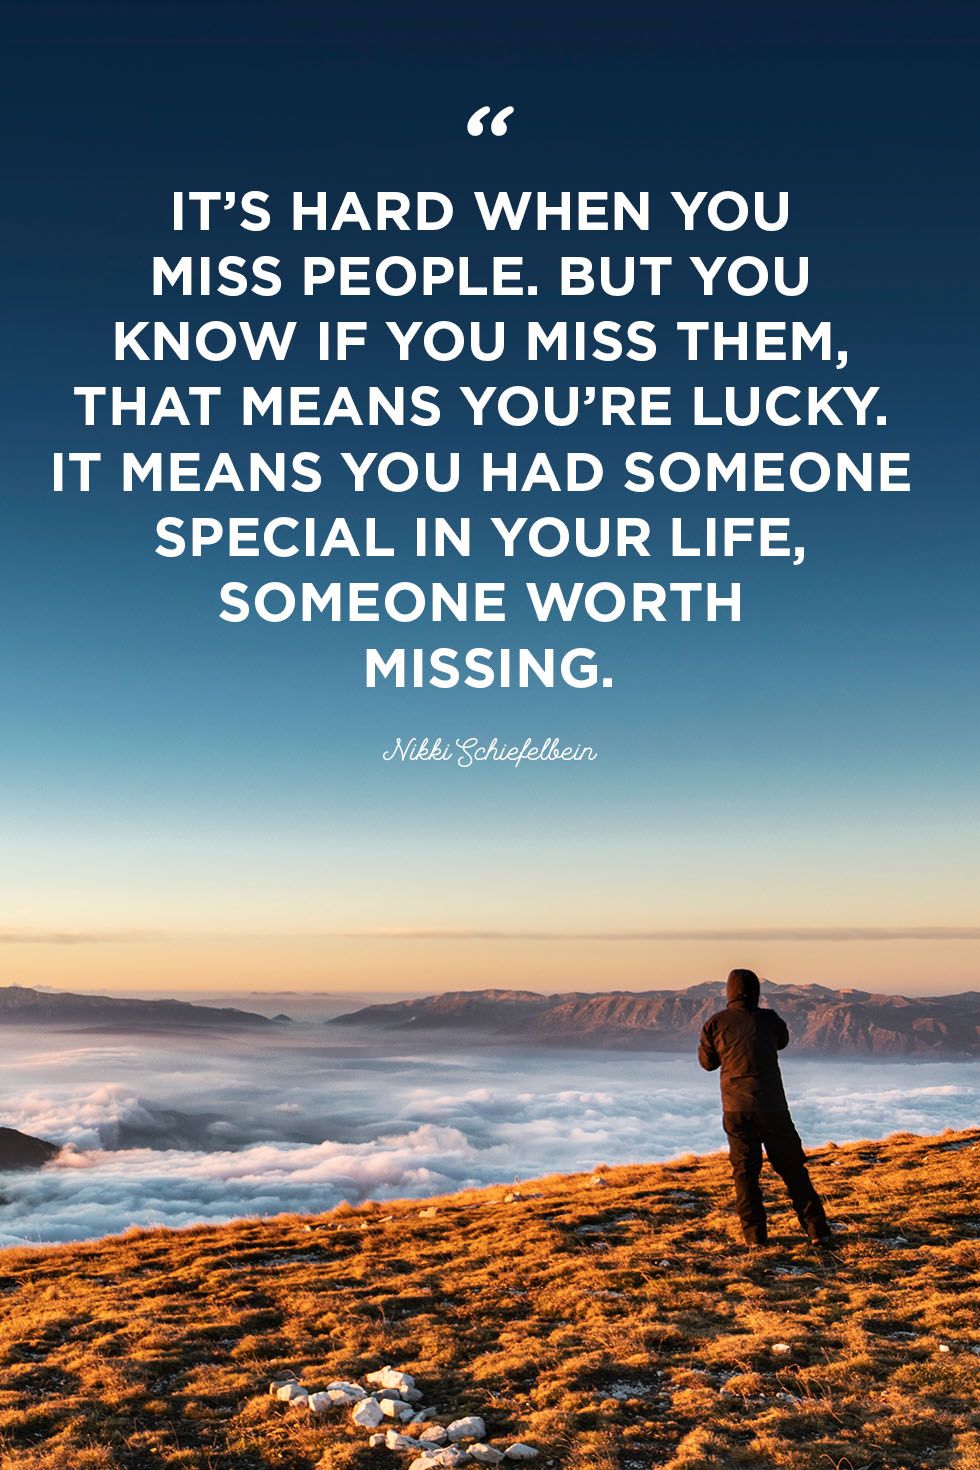 Missing someone quotes about wise Wise Quotes